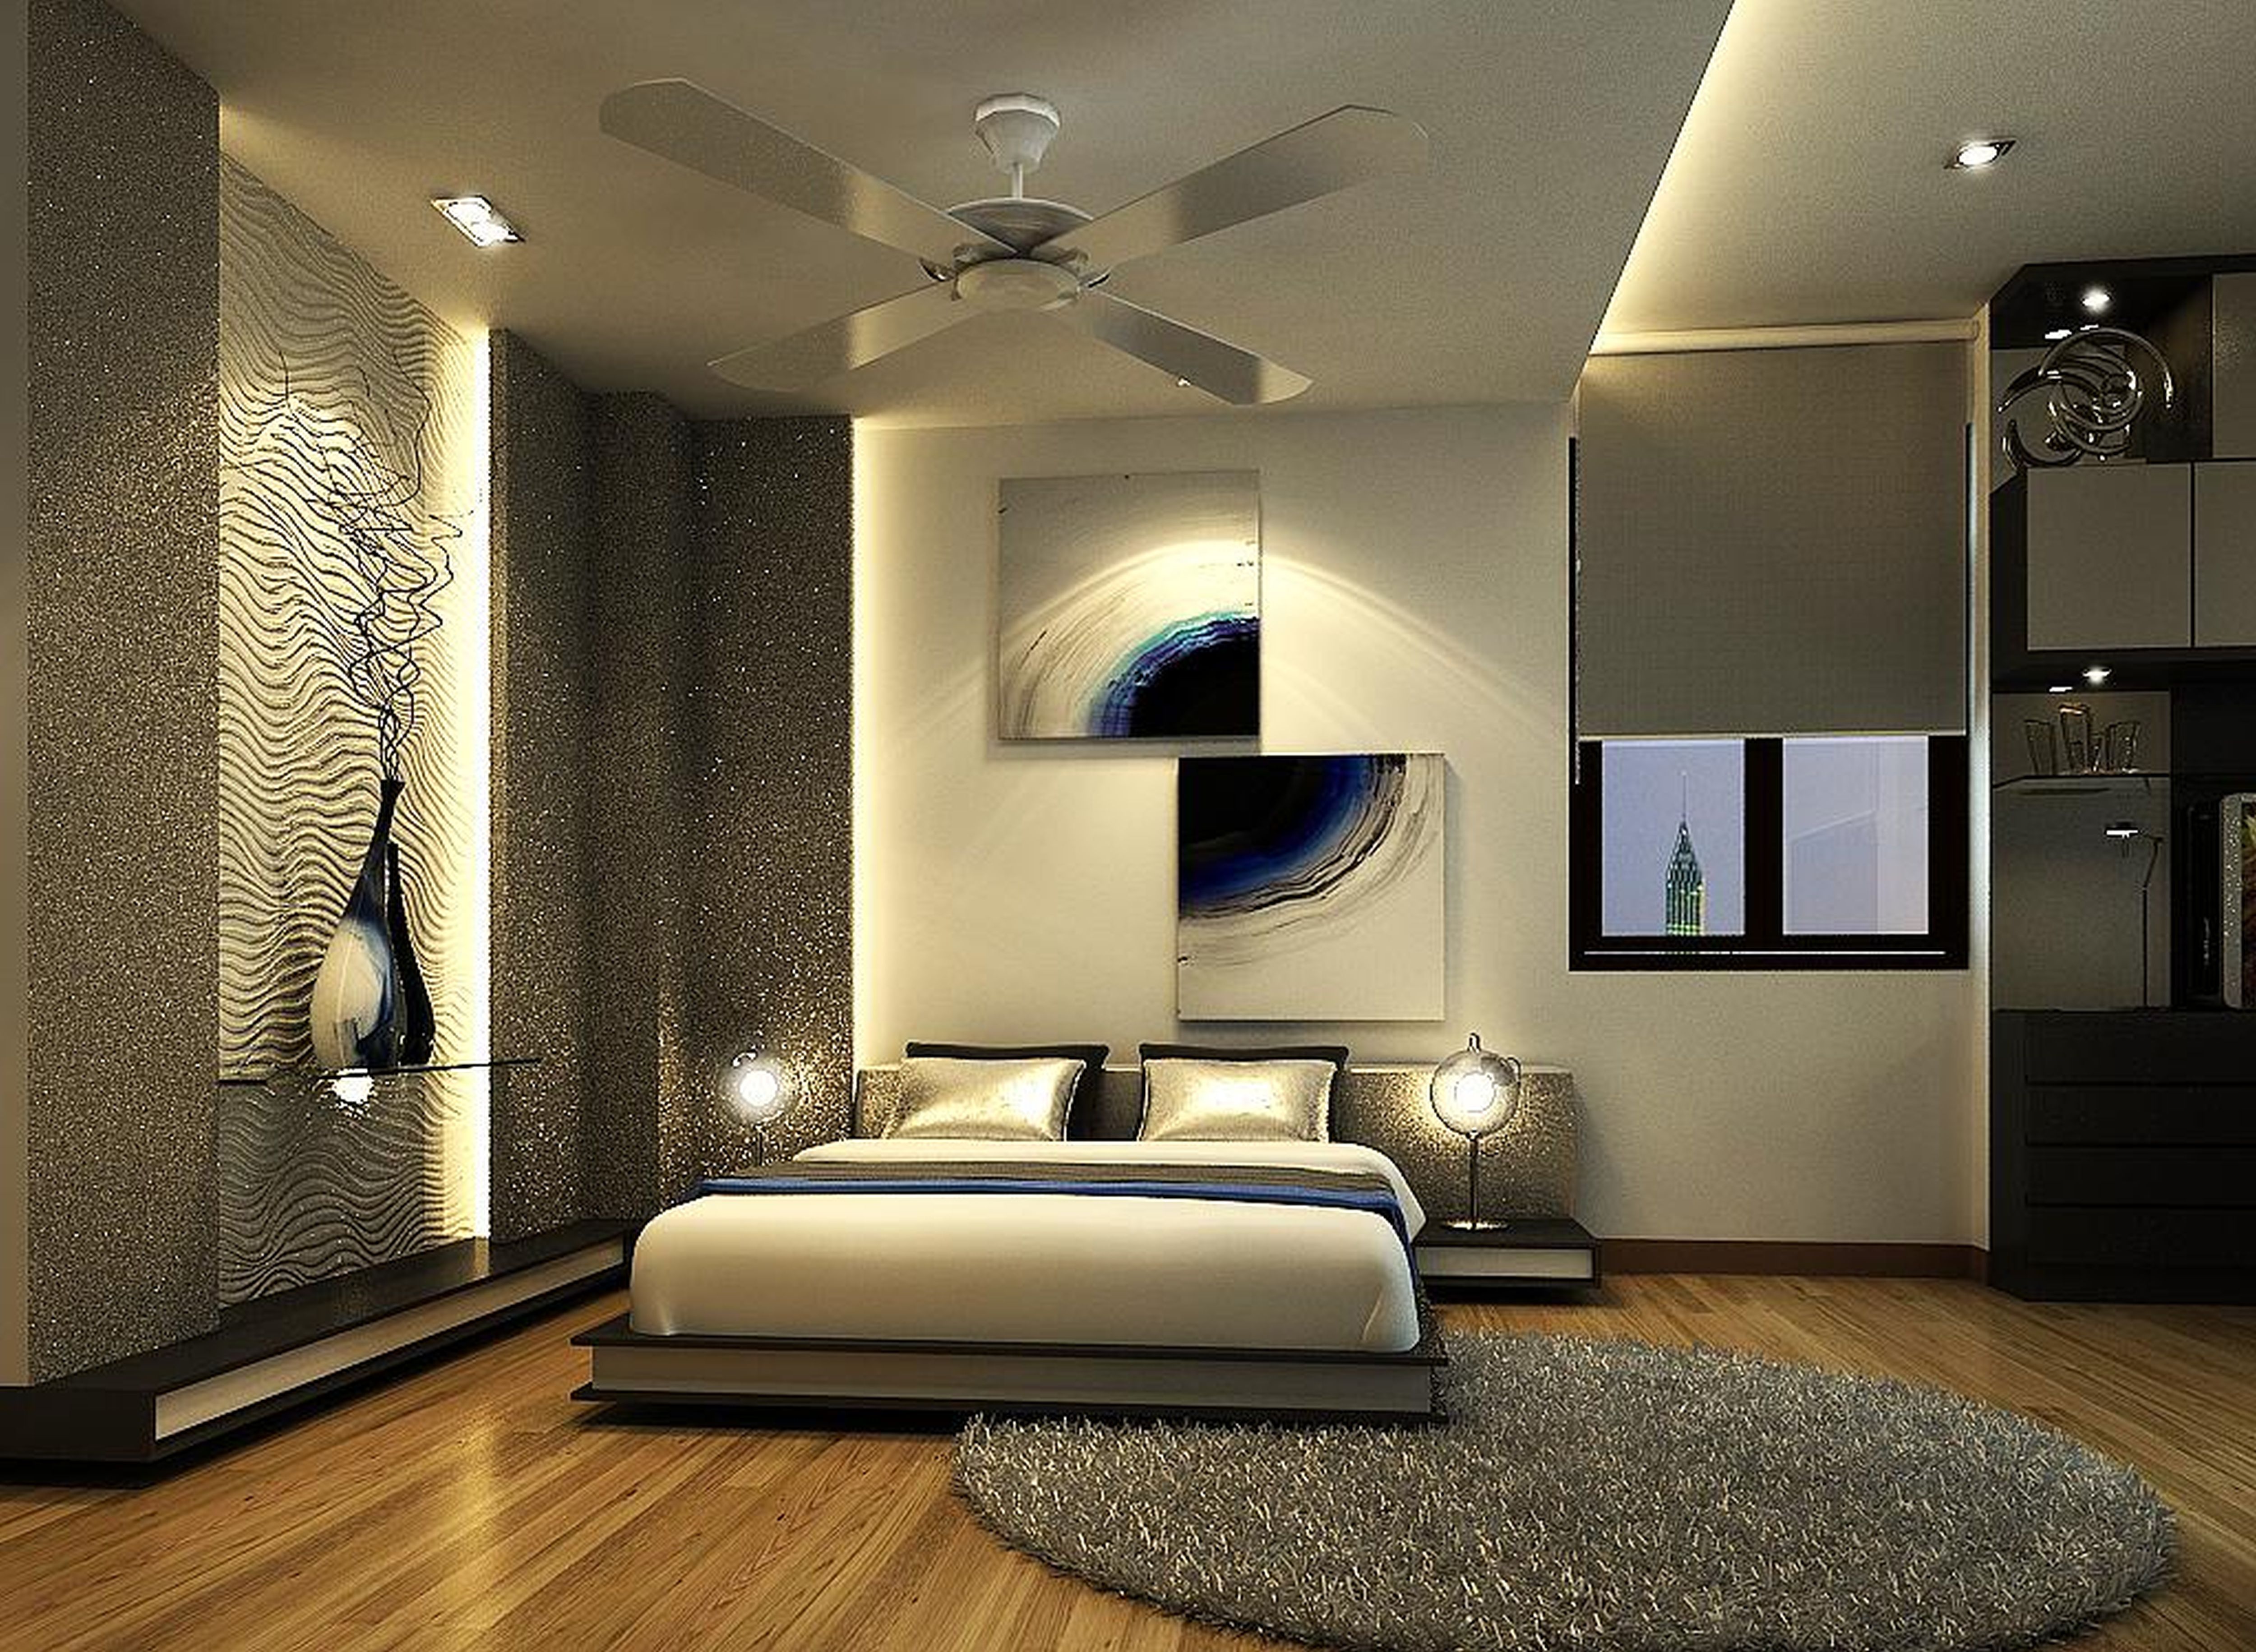 Gallery Decorating Ideas For Bedrooms